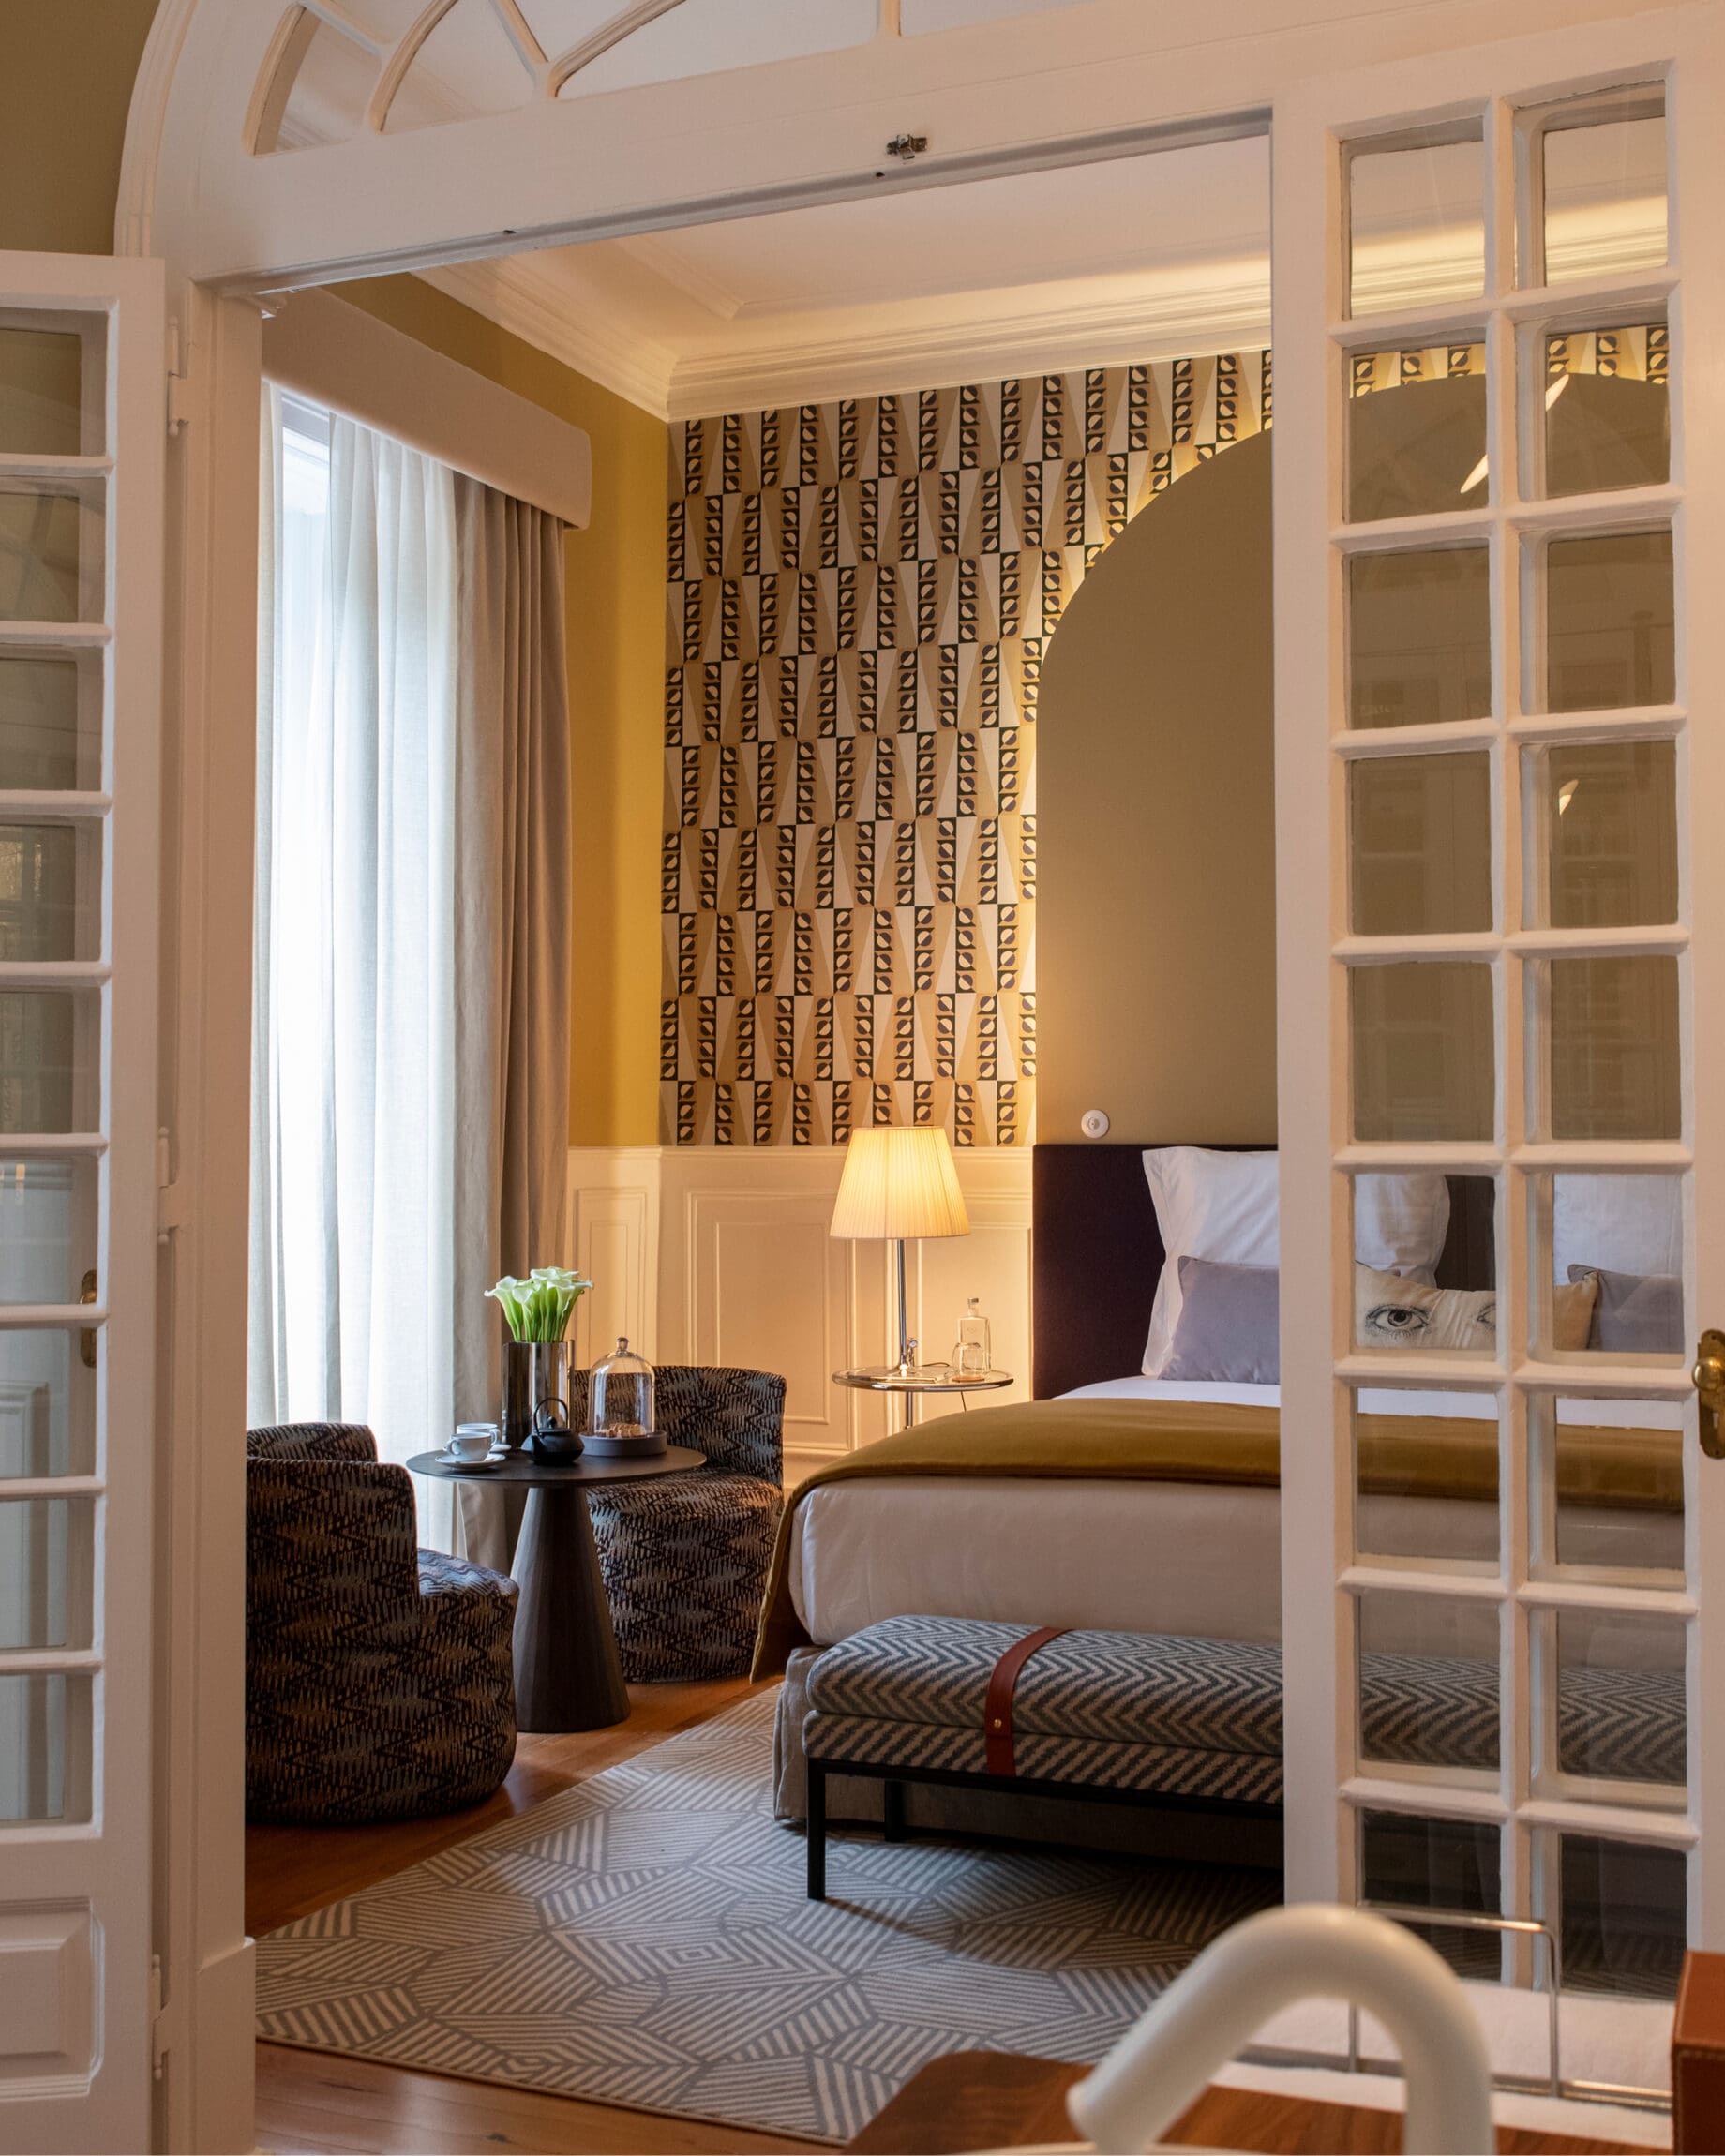 The best hotels in Lisbon | bedroom interiors at Sublime Lisboa